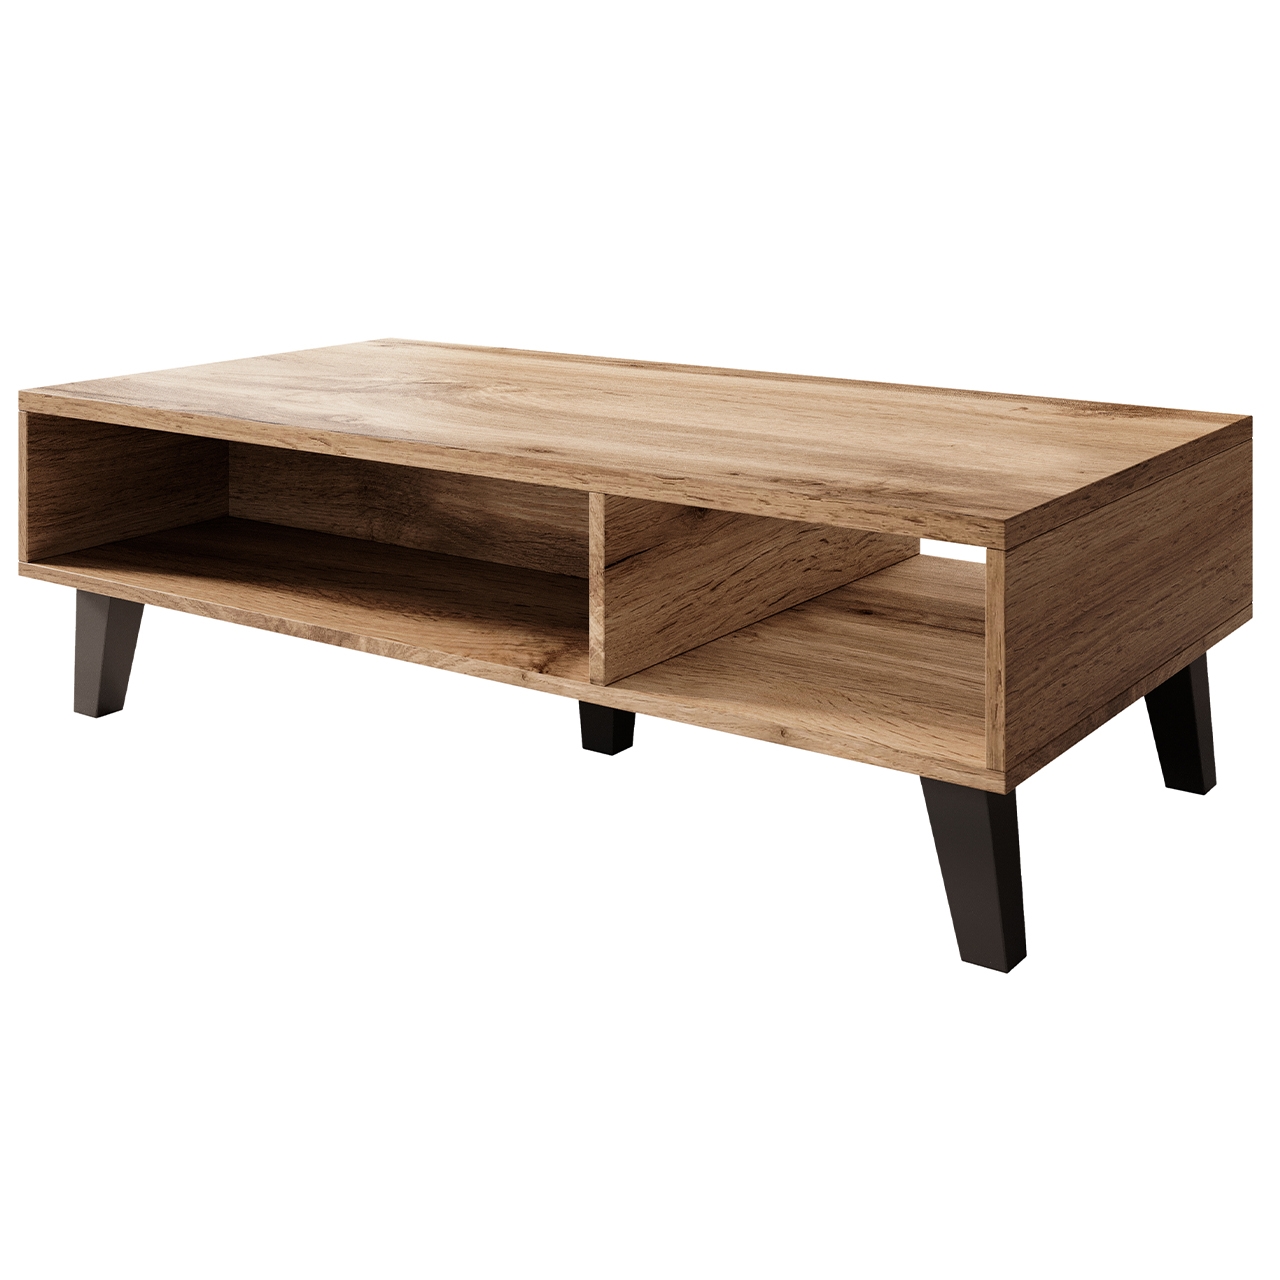 Coffee table NORD wotan oak / anthracite